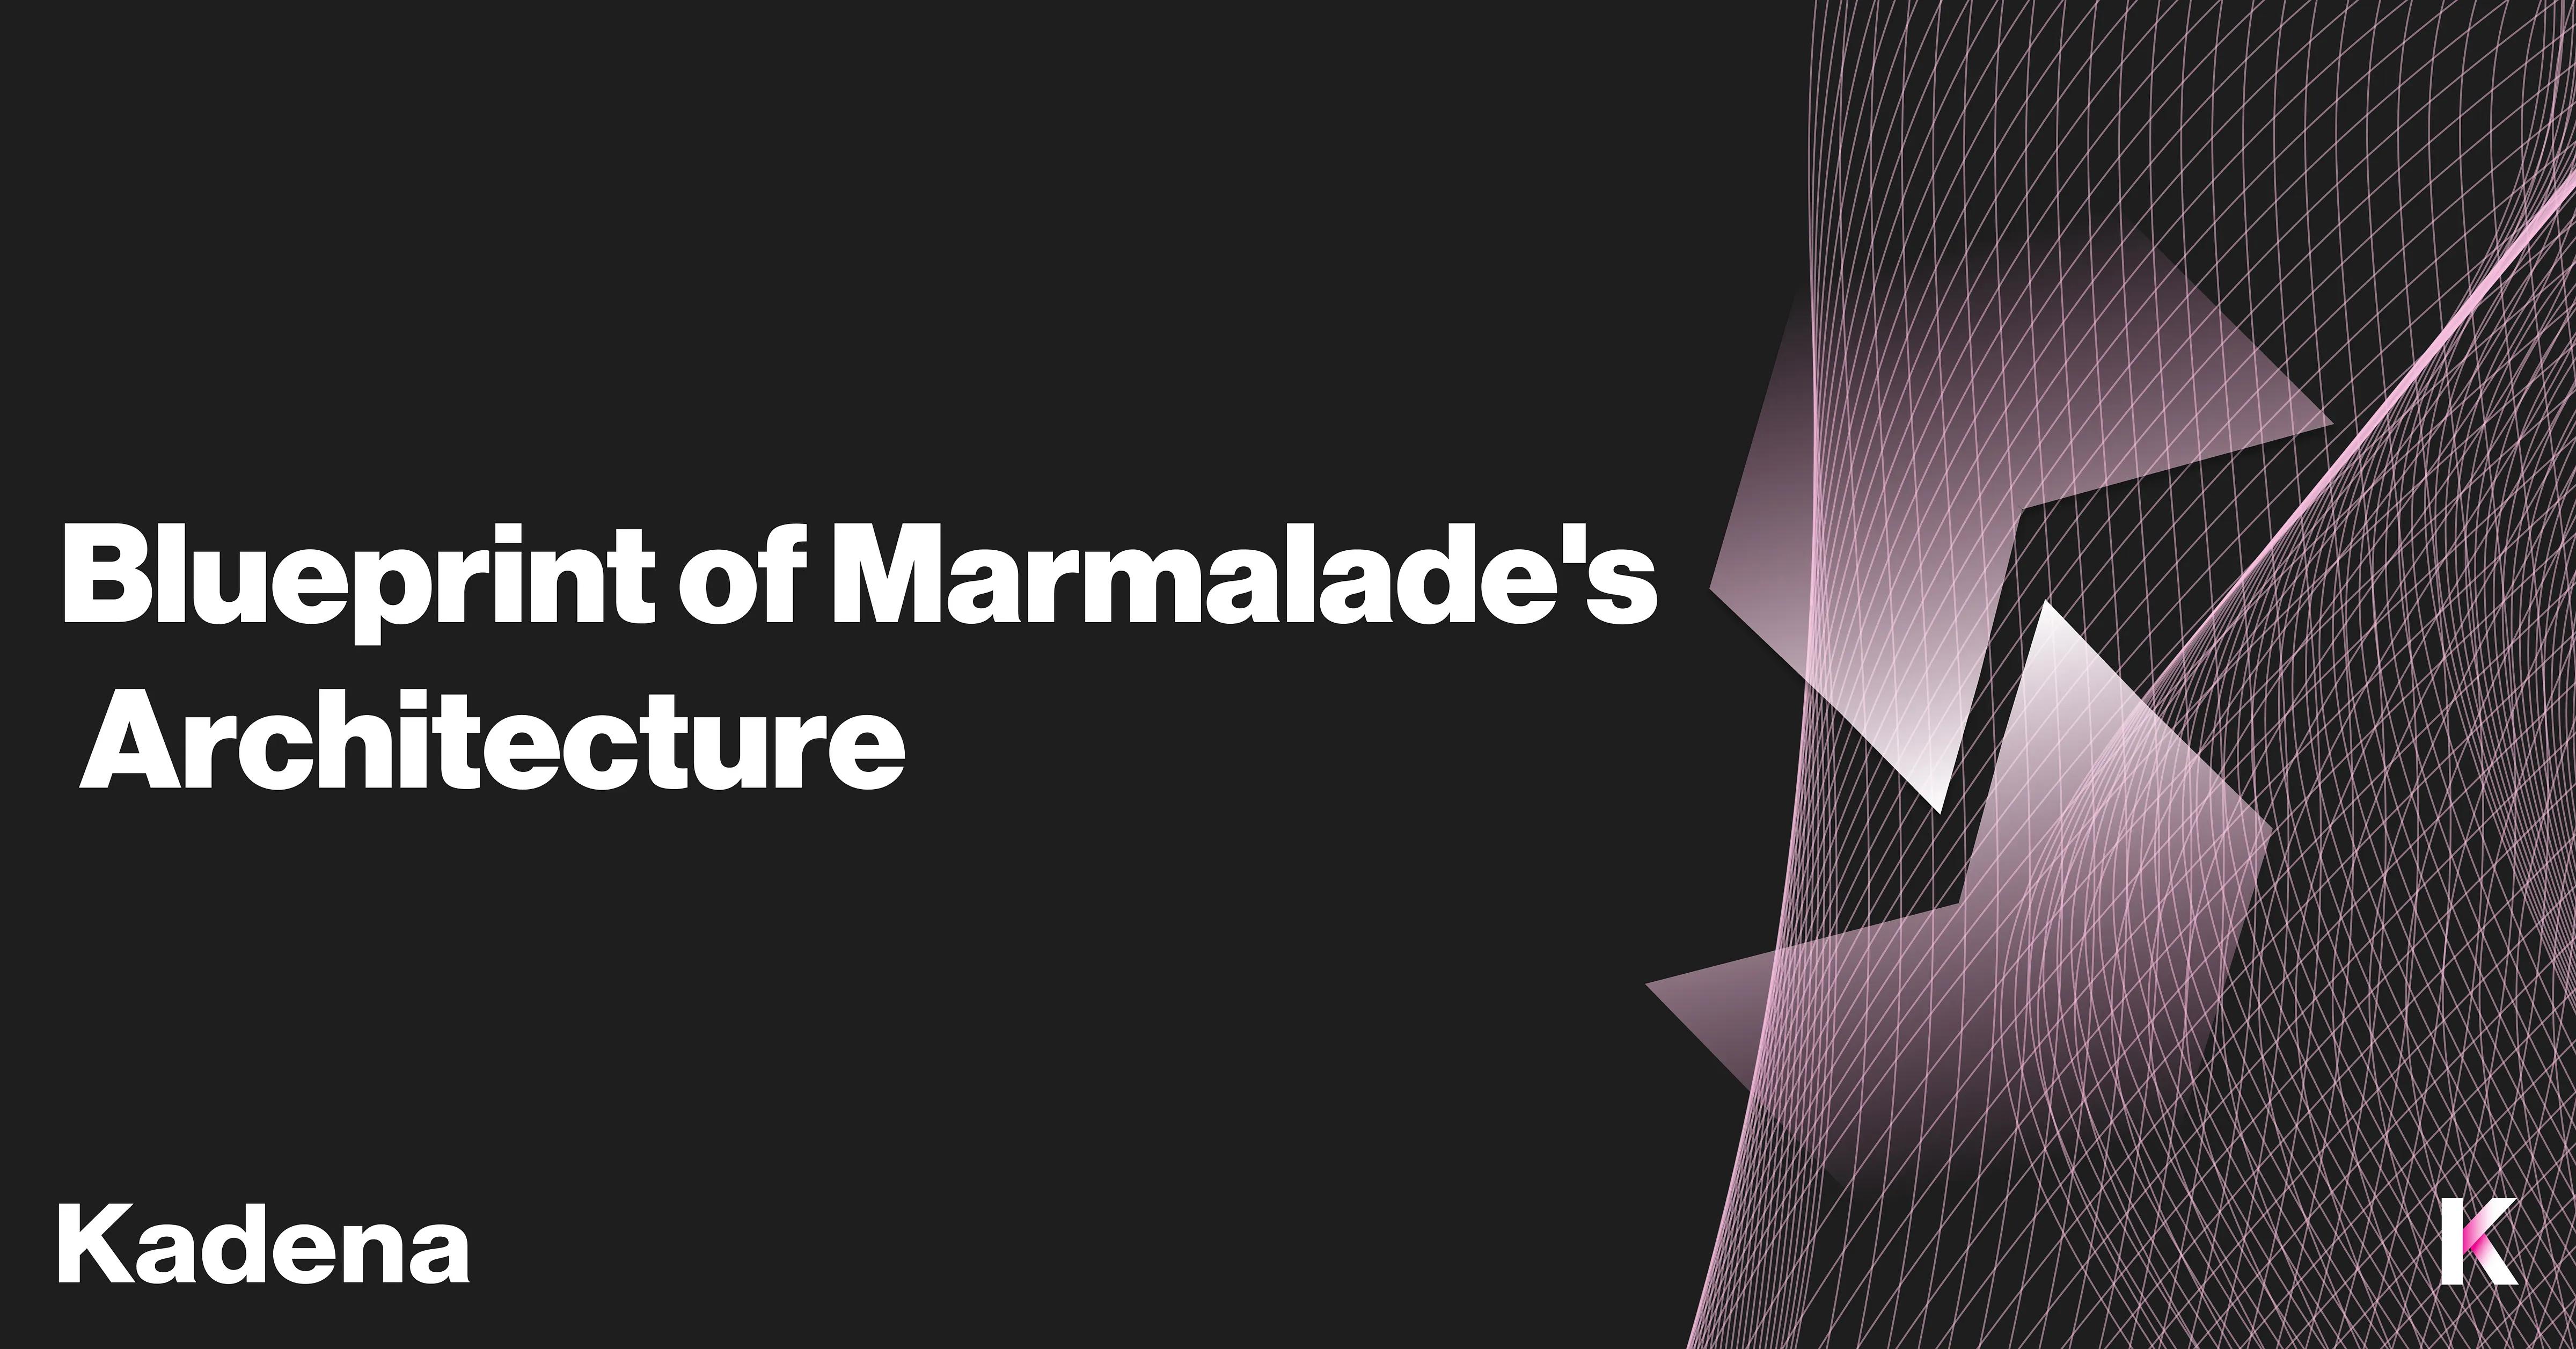 Marmalade V2: An Architectural Overview